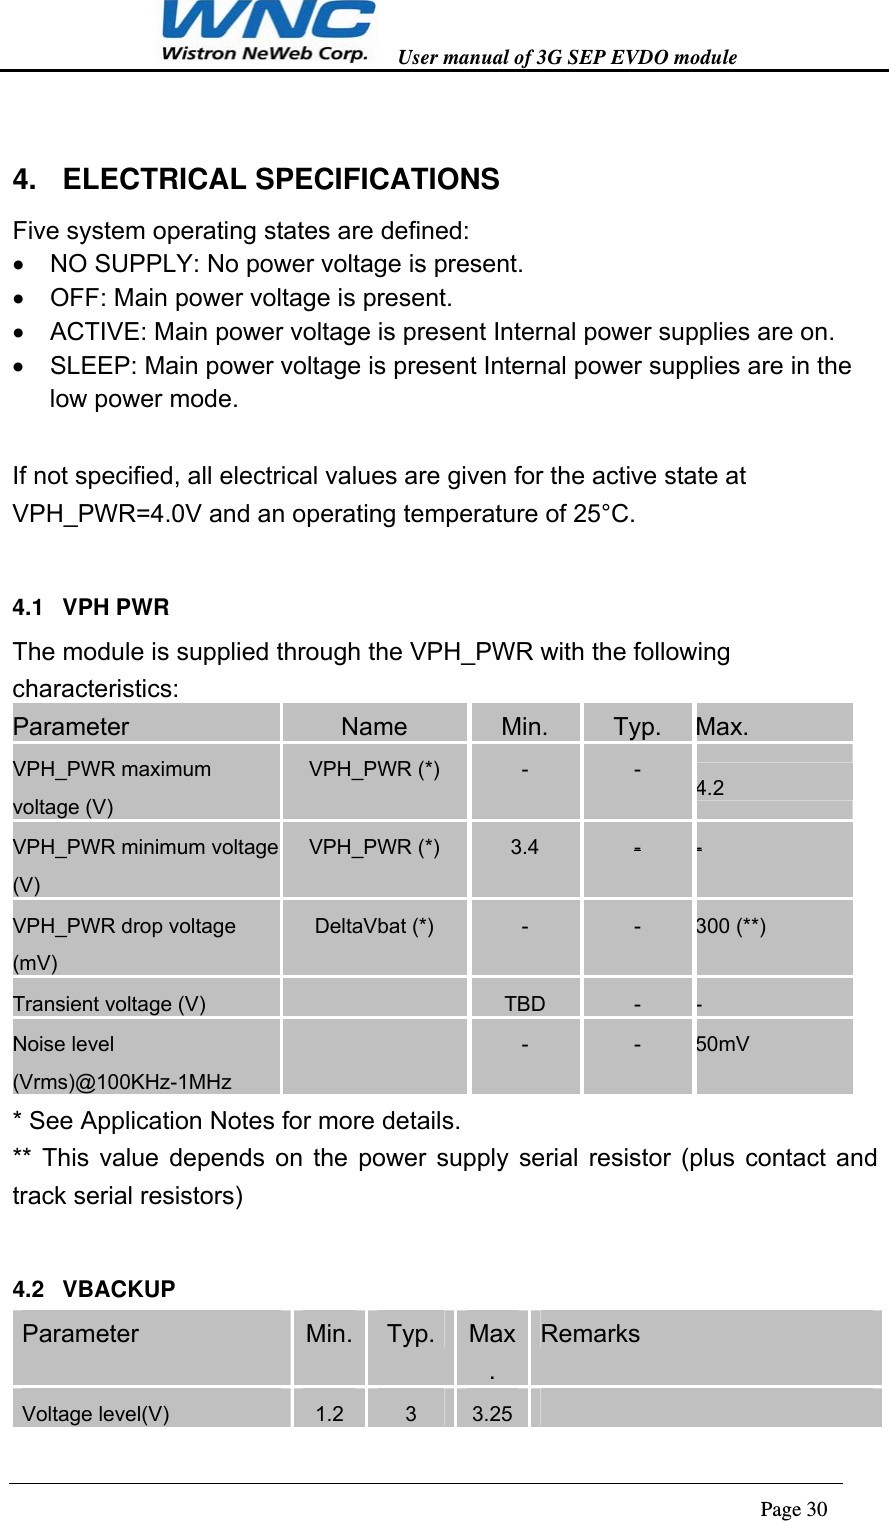   User manual of 3G SEP EVDO module                                                                      Page 30  4. ELECTRICAL SPECIFICATIONS Five system operating states are defined:     NO SUPPLY: No power voltage is present.     OFF: Main power voltage is present.     ACTIVE: Main power voltage is present Internal power supplies are on.     SLEEP: Main power voltage is present Internal power supplies are in the low power mode.    If not specified, all electrical values are given for the active state at VPH_PWR=4.0V and an operating temperature of 25°C. 4.1 VPH PWR The module is supplied through the VPH_PWR with the following characteristics: Parameter  Name  Min.  Typ.  Max. VPH_PWR maximum voltage (V) VPH_PWR (*)  -  -  4.2 VPH_PWR minimum voltage (V) VPH_PWR (*)  3.4  -  - VPH_PWR drop voltage (mV) DeltaVbat (*)  -  -  300 (**) Transient voltage (V)    TBD  -  - Noise level (Vrms)@100KHz-1MHz   -  -  50mV * See Application Notes for more details. ** This value depends on the power supply serial resistor (plus contact and track serial resistors) 4.2 VBACKUP Parameter  Min. Typ. Max. Remarks Voltage level(V)  1.2 3  3.25  